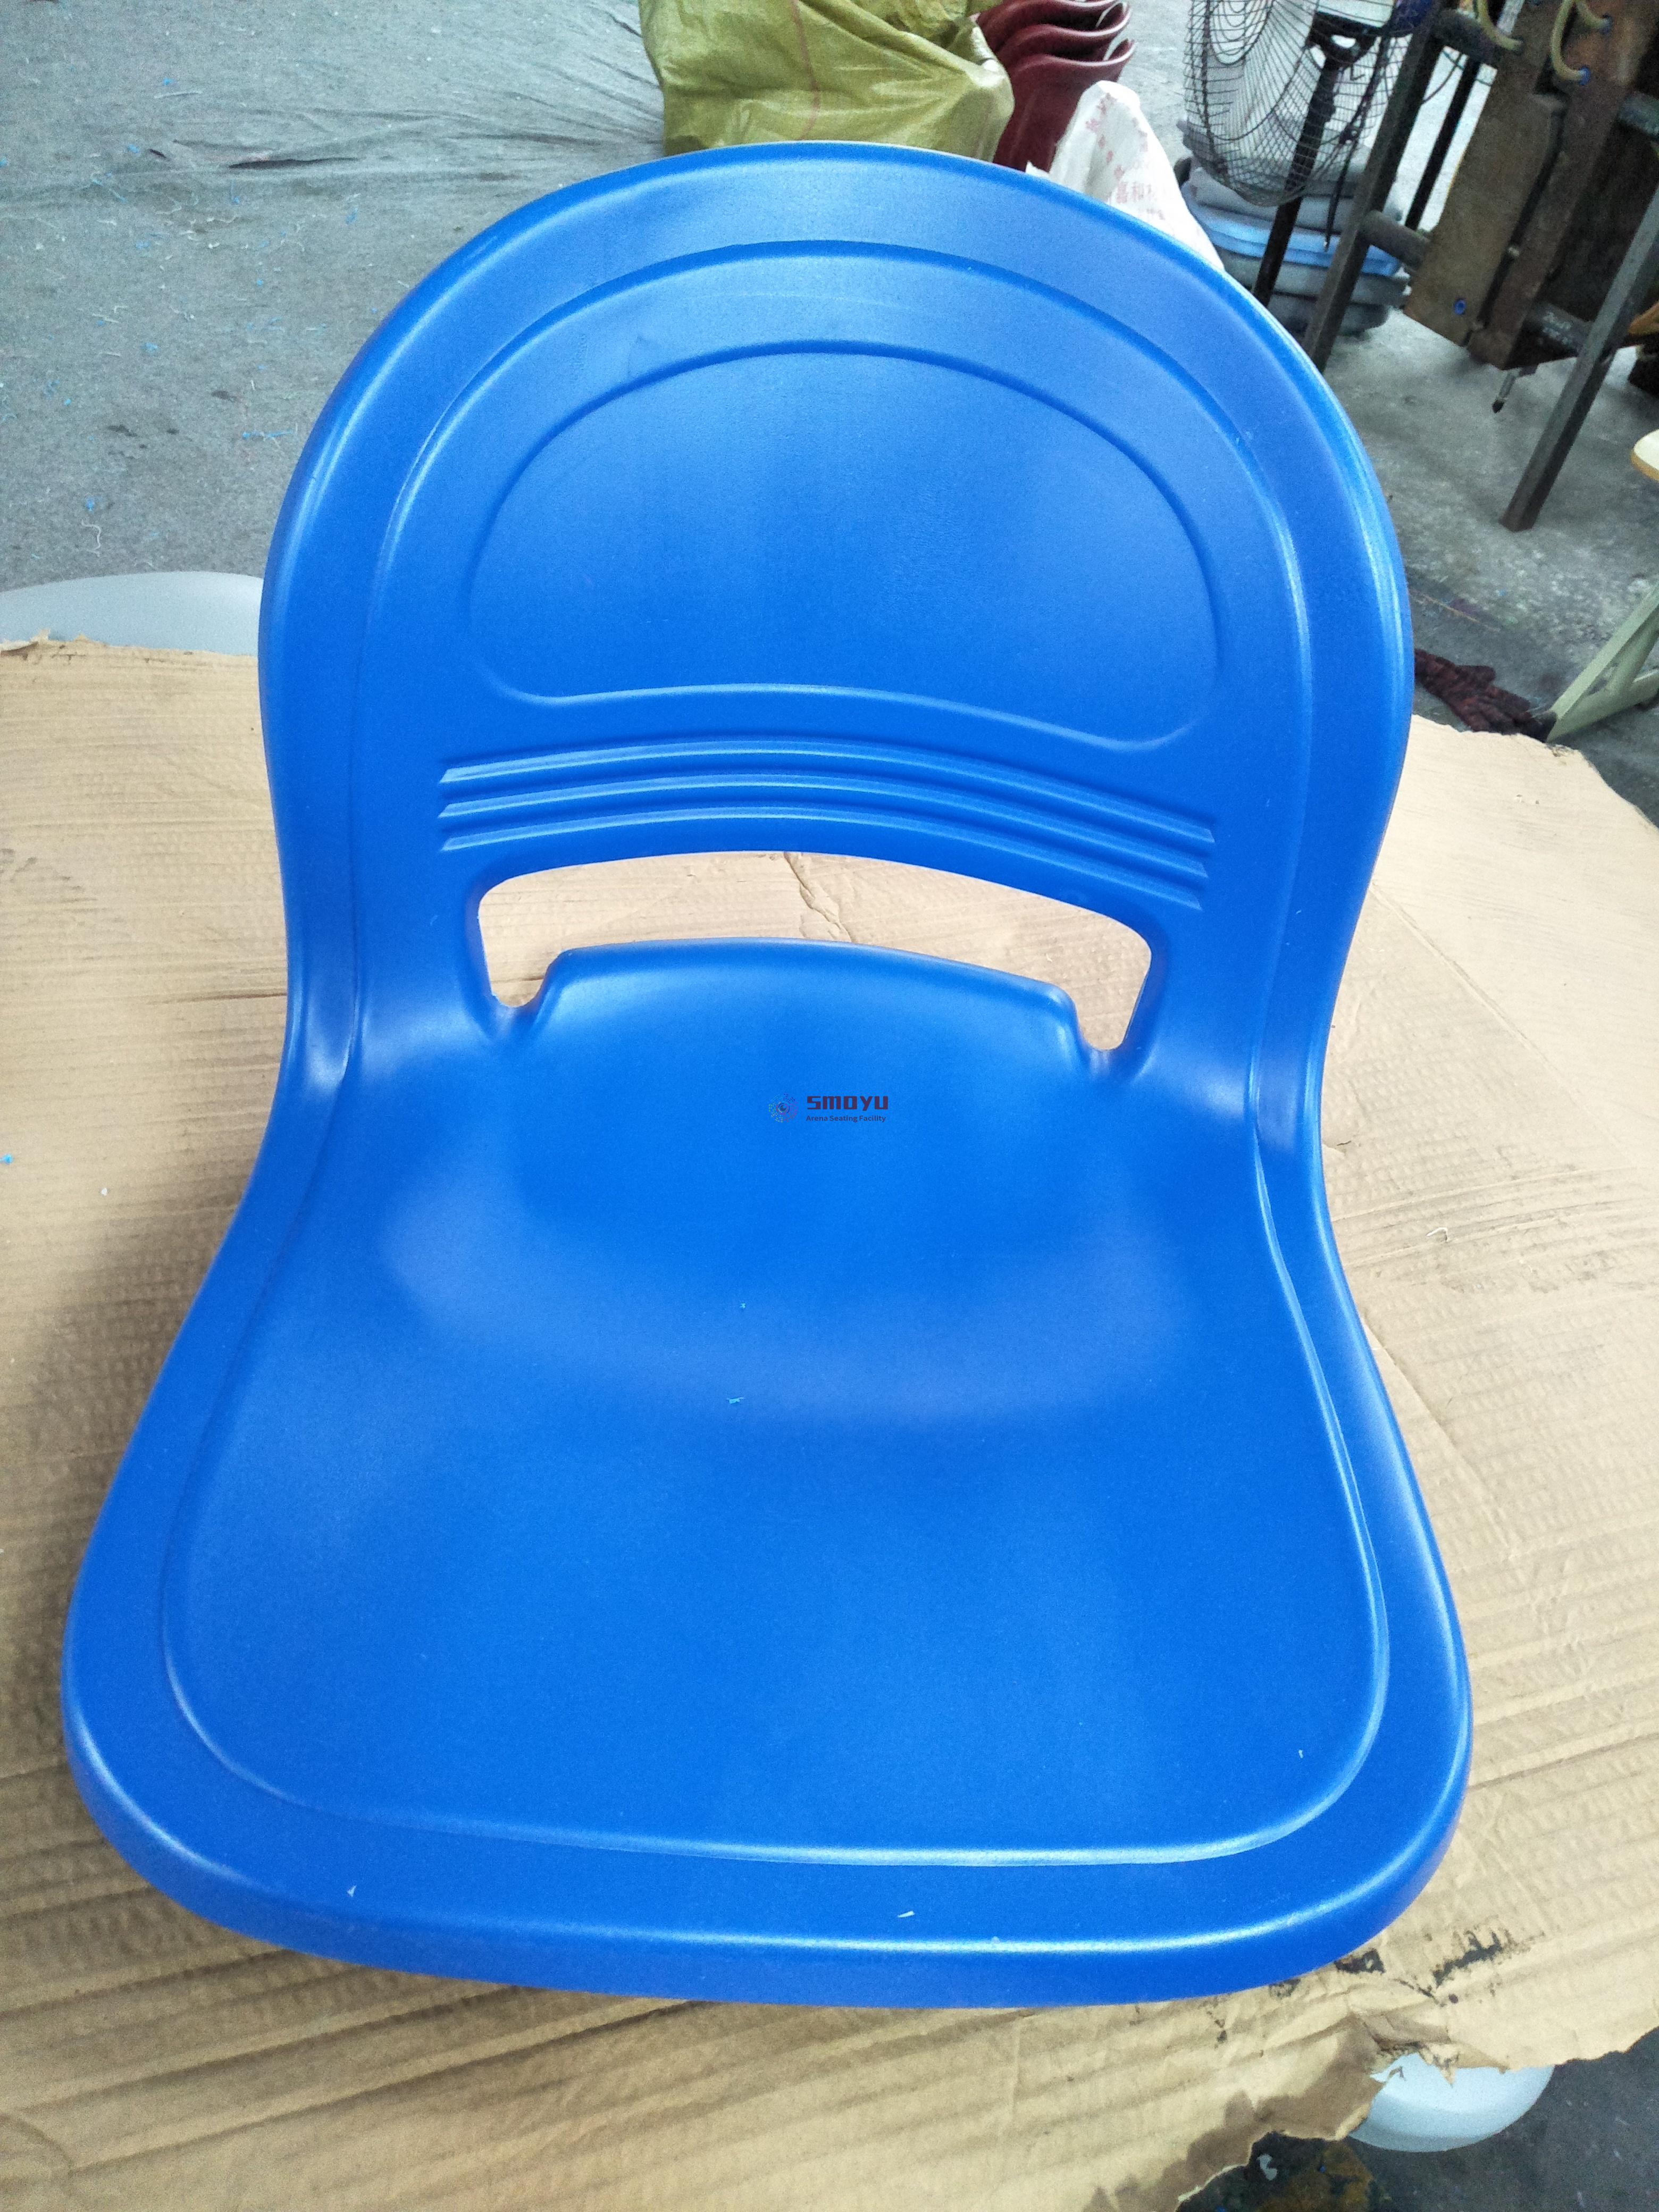 stadium seating chair with back in blue color from our warehouse before packaging and shipment